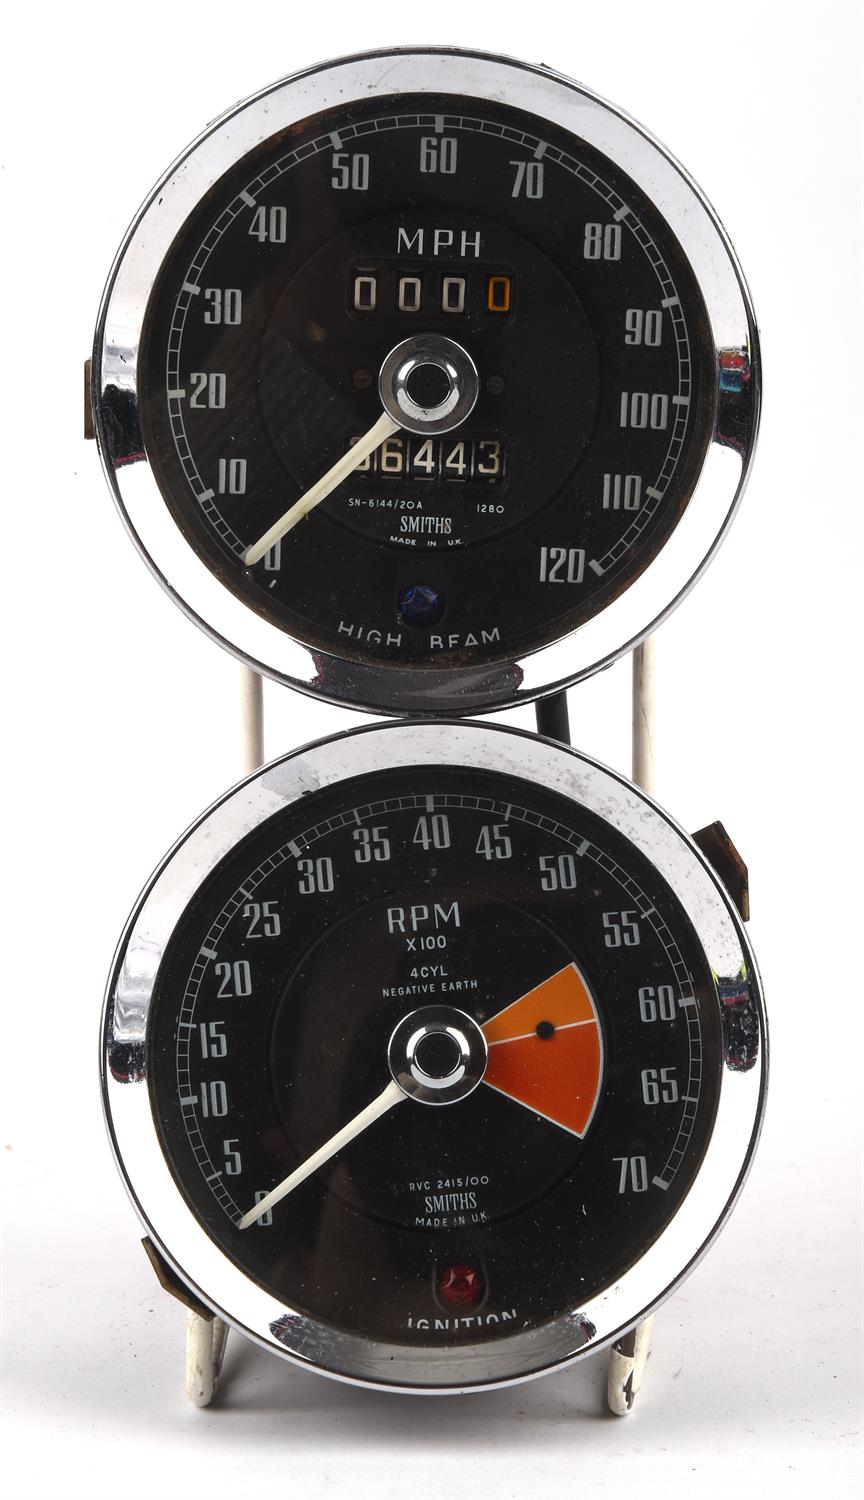 Two Vintage Smiths Gauges - 120mph Speedometer SN-6144/20A 1280 displaying 36,443 miles along with